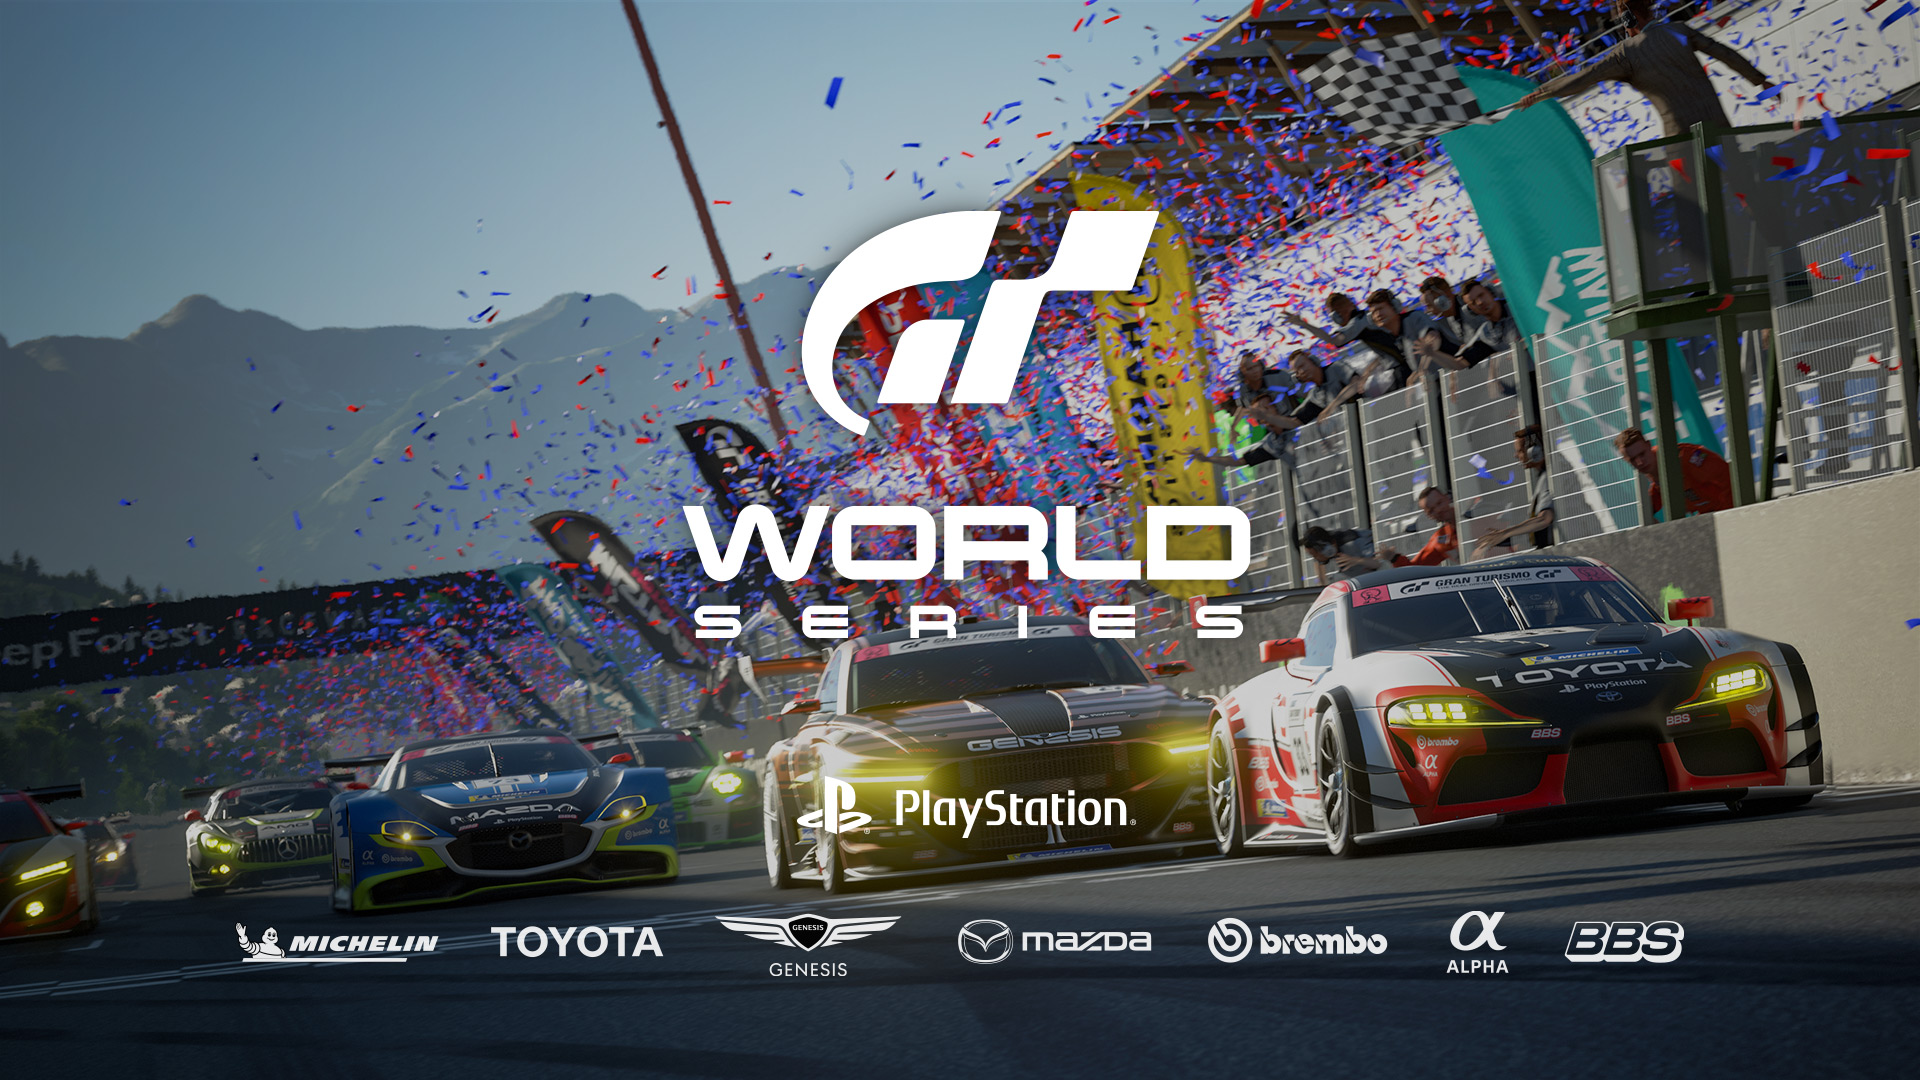 More information about "Gran Turismo World Series 2022 Nations Cup - Round 2 [9 Ottobre ore 15]"